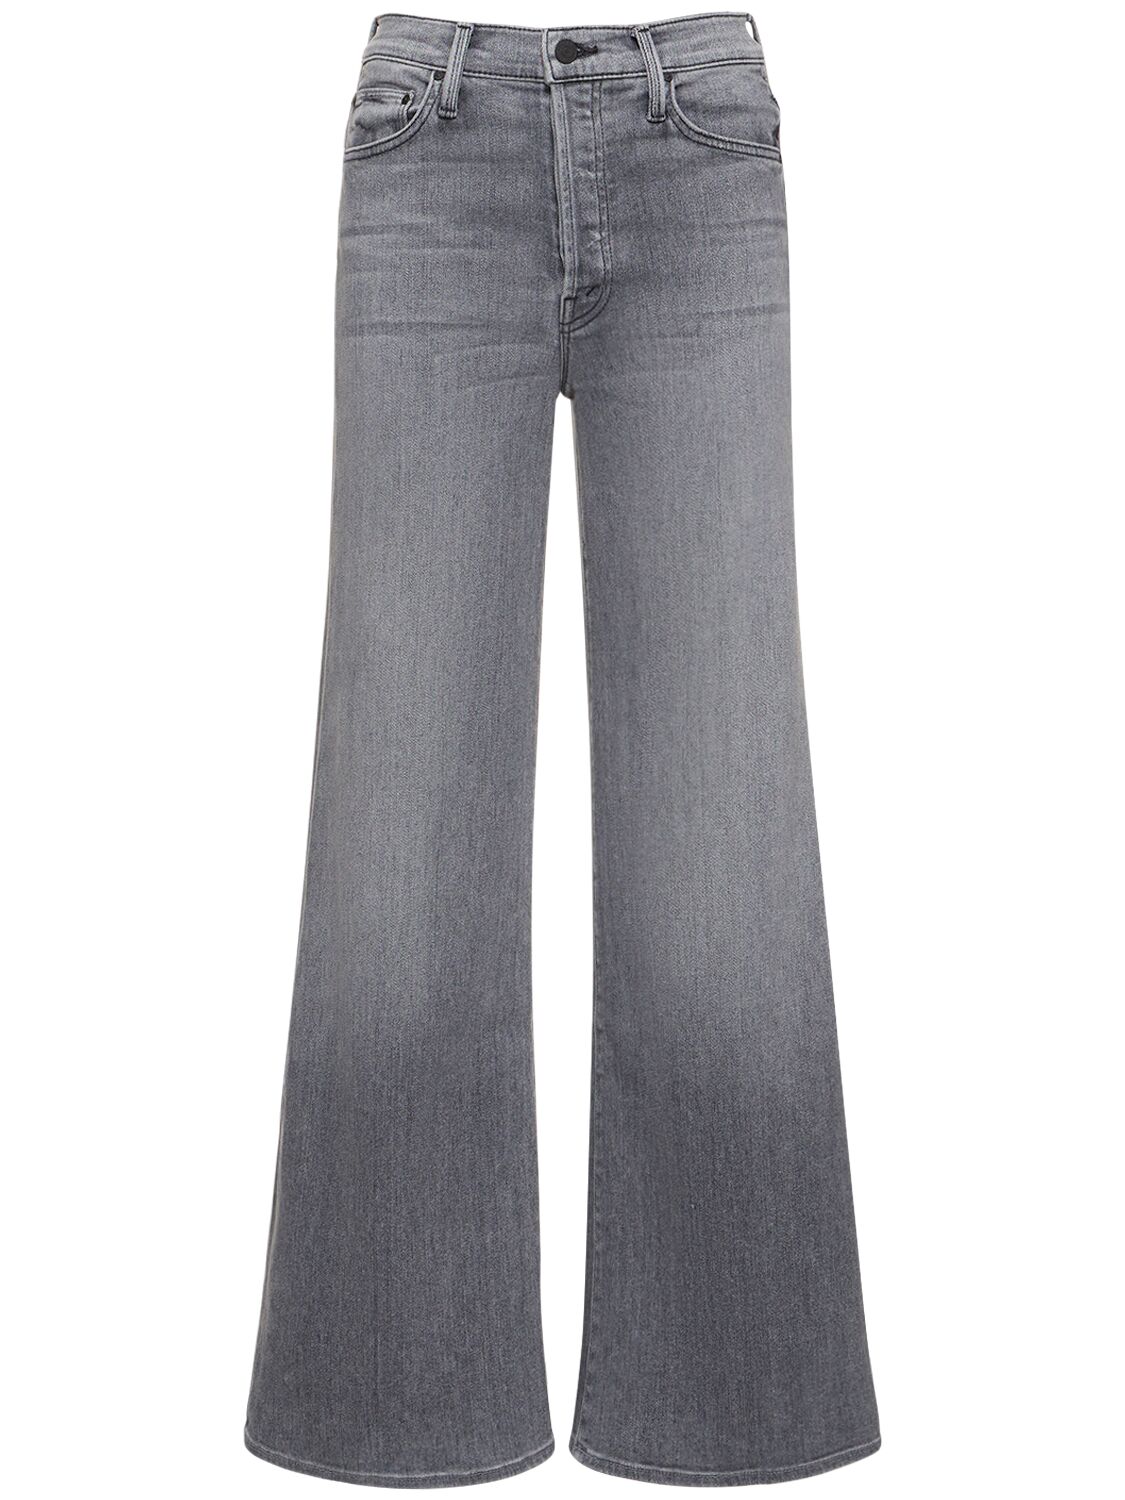 MOTHER THE TOMCAT ROLLER MID RISE COTTON JEANS